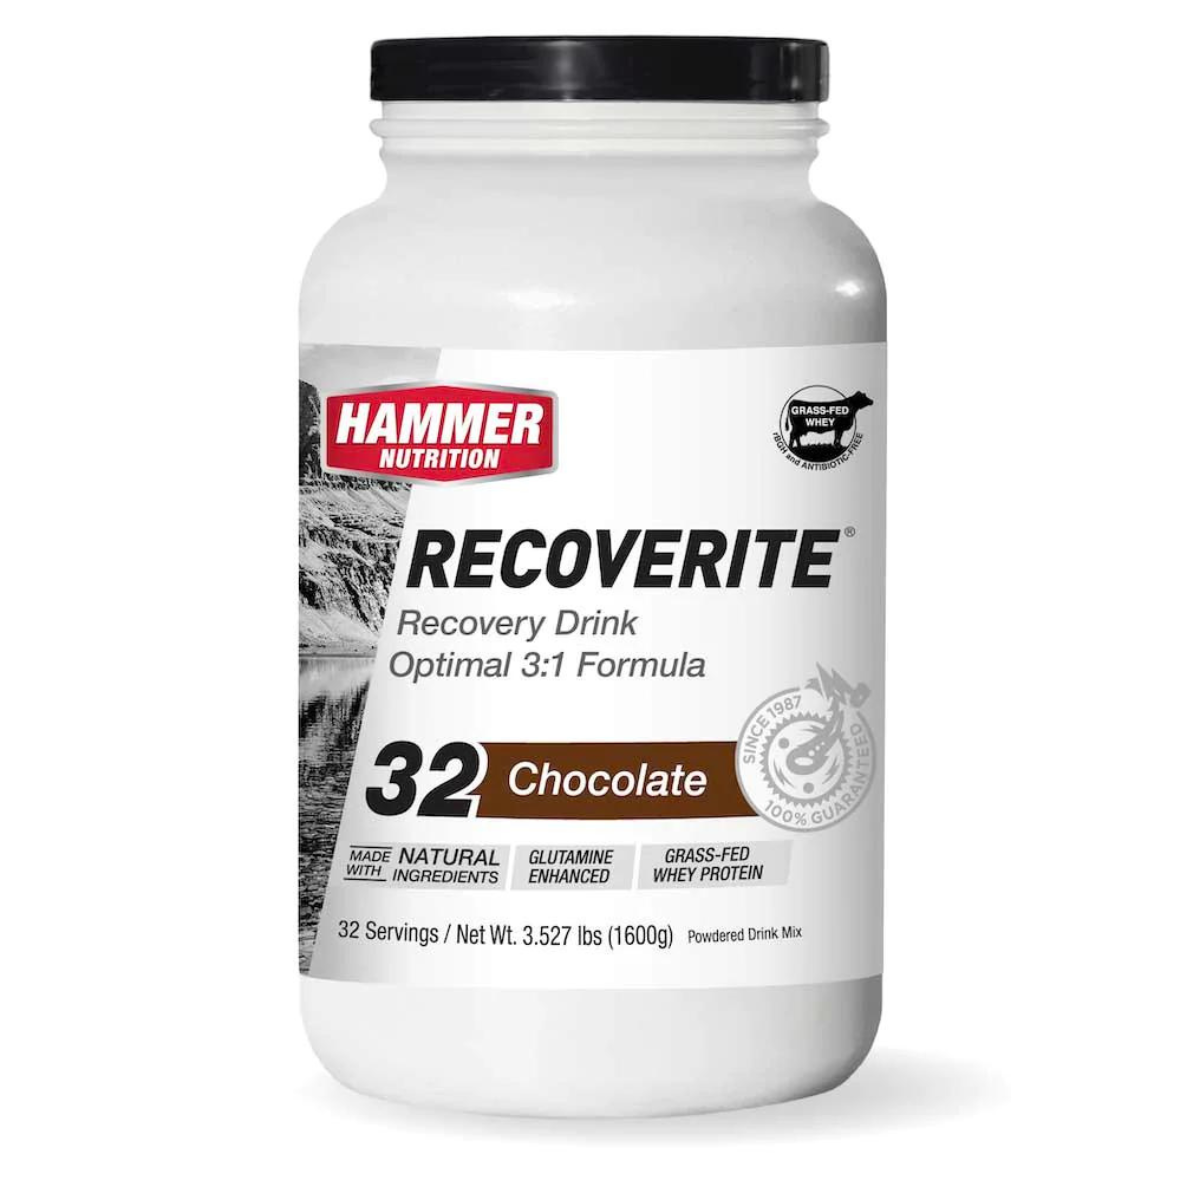 Hammer Nutrition - Recoverite - Chocolate